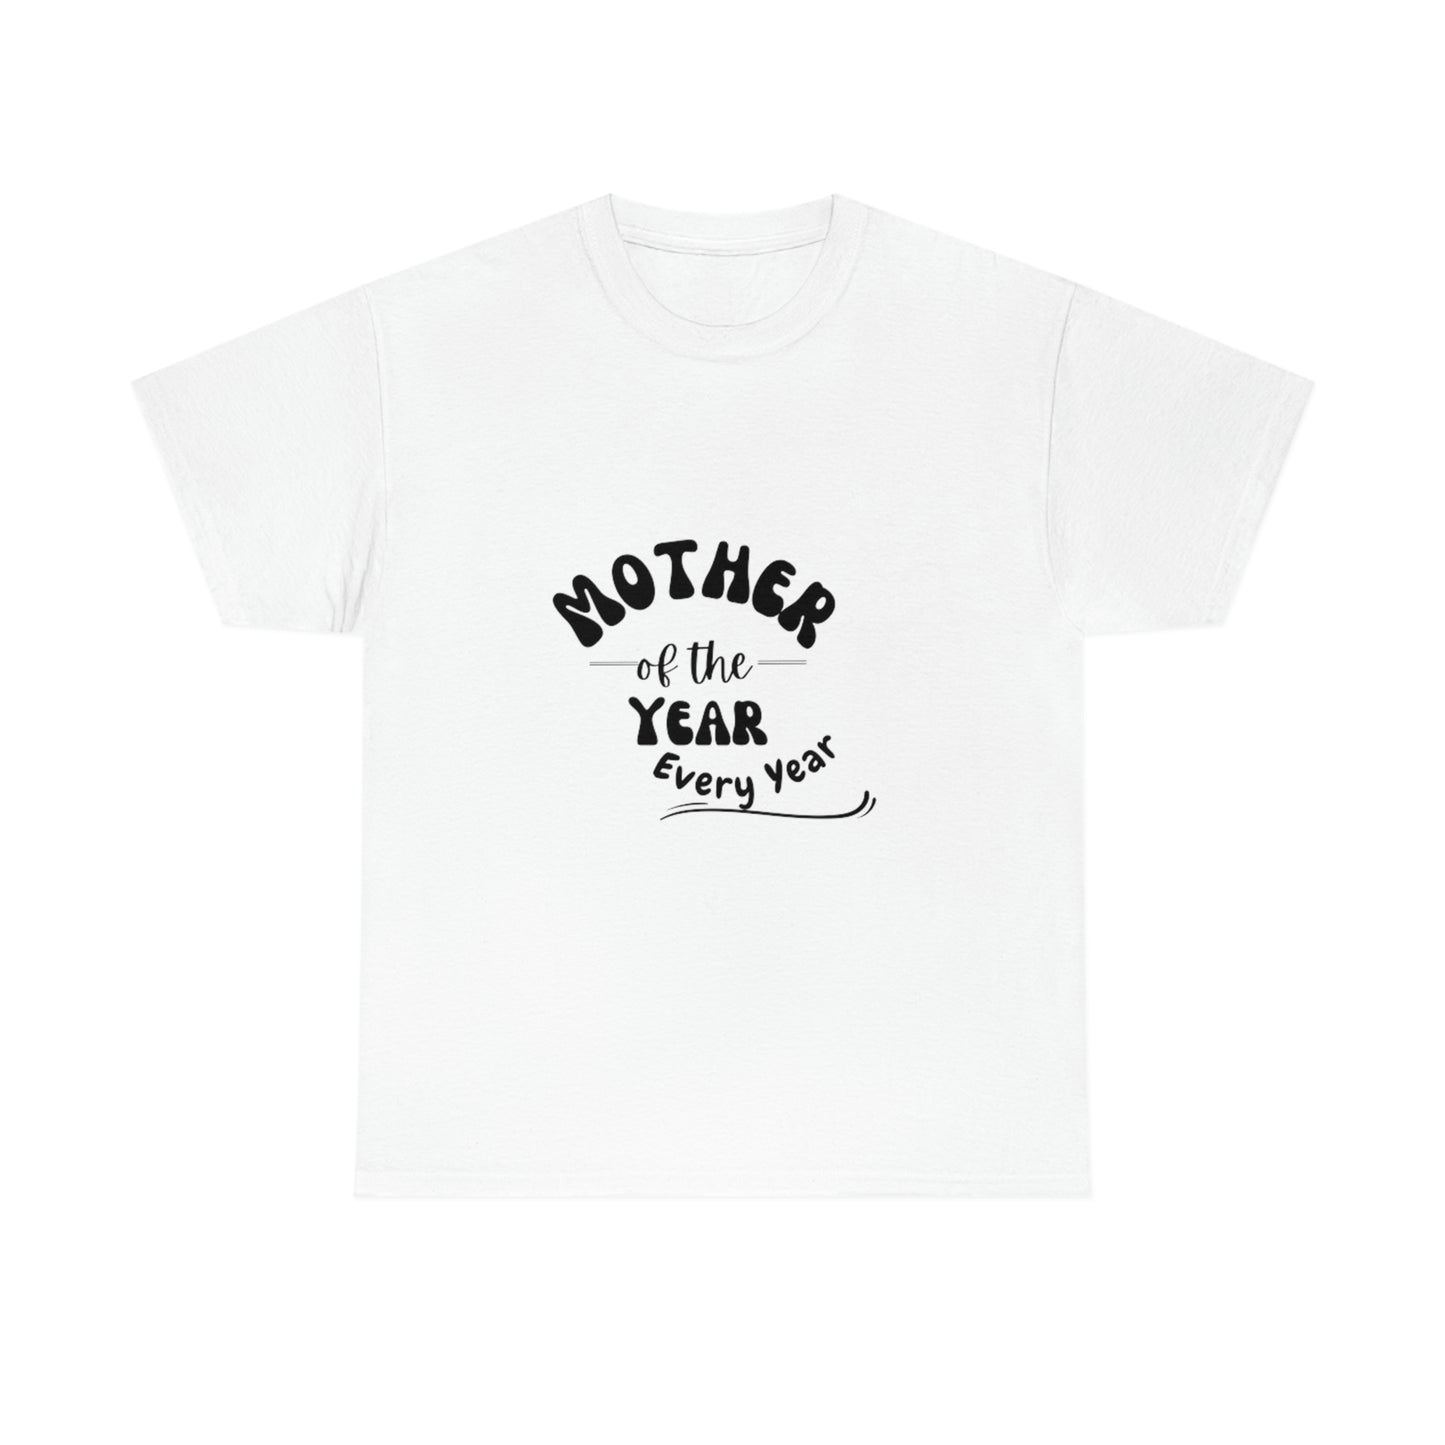 Shop Mother of the Year Tee for Mom - T-Shirt Goodlifebean Giant Plushies